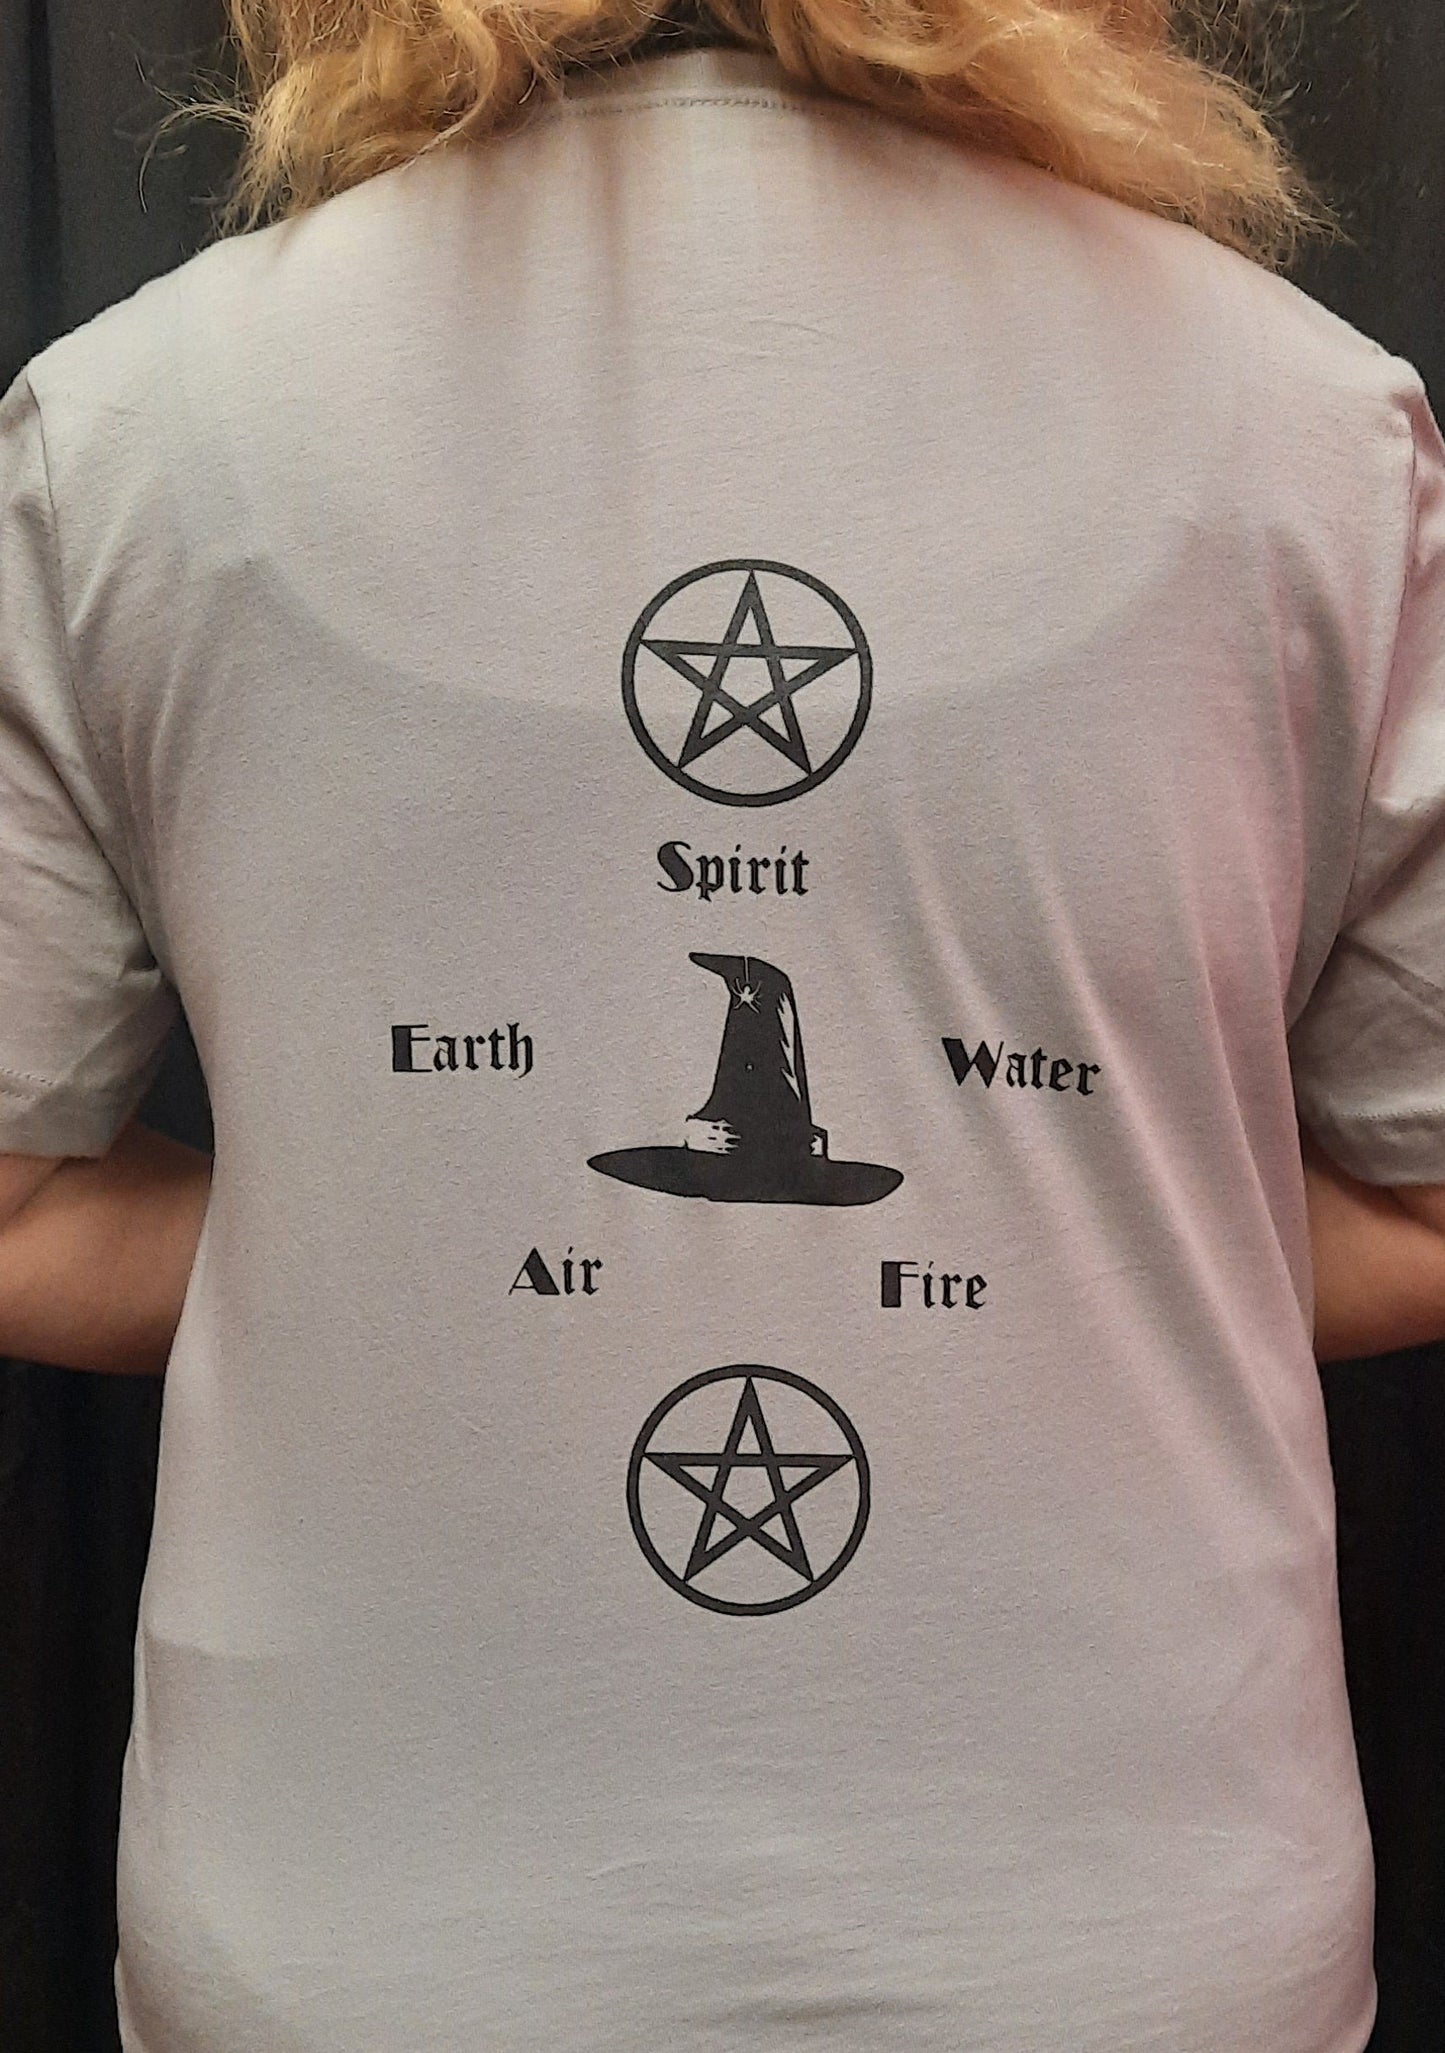 Bella Canvas short sleeve T-Shirt, size small.  "Wiccan" design on front.  Earth, Air, Fire, Water, Spirit design on back.